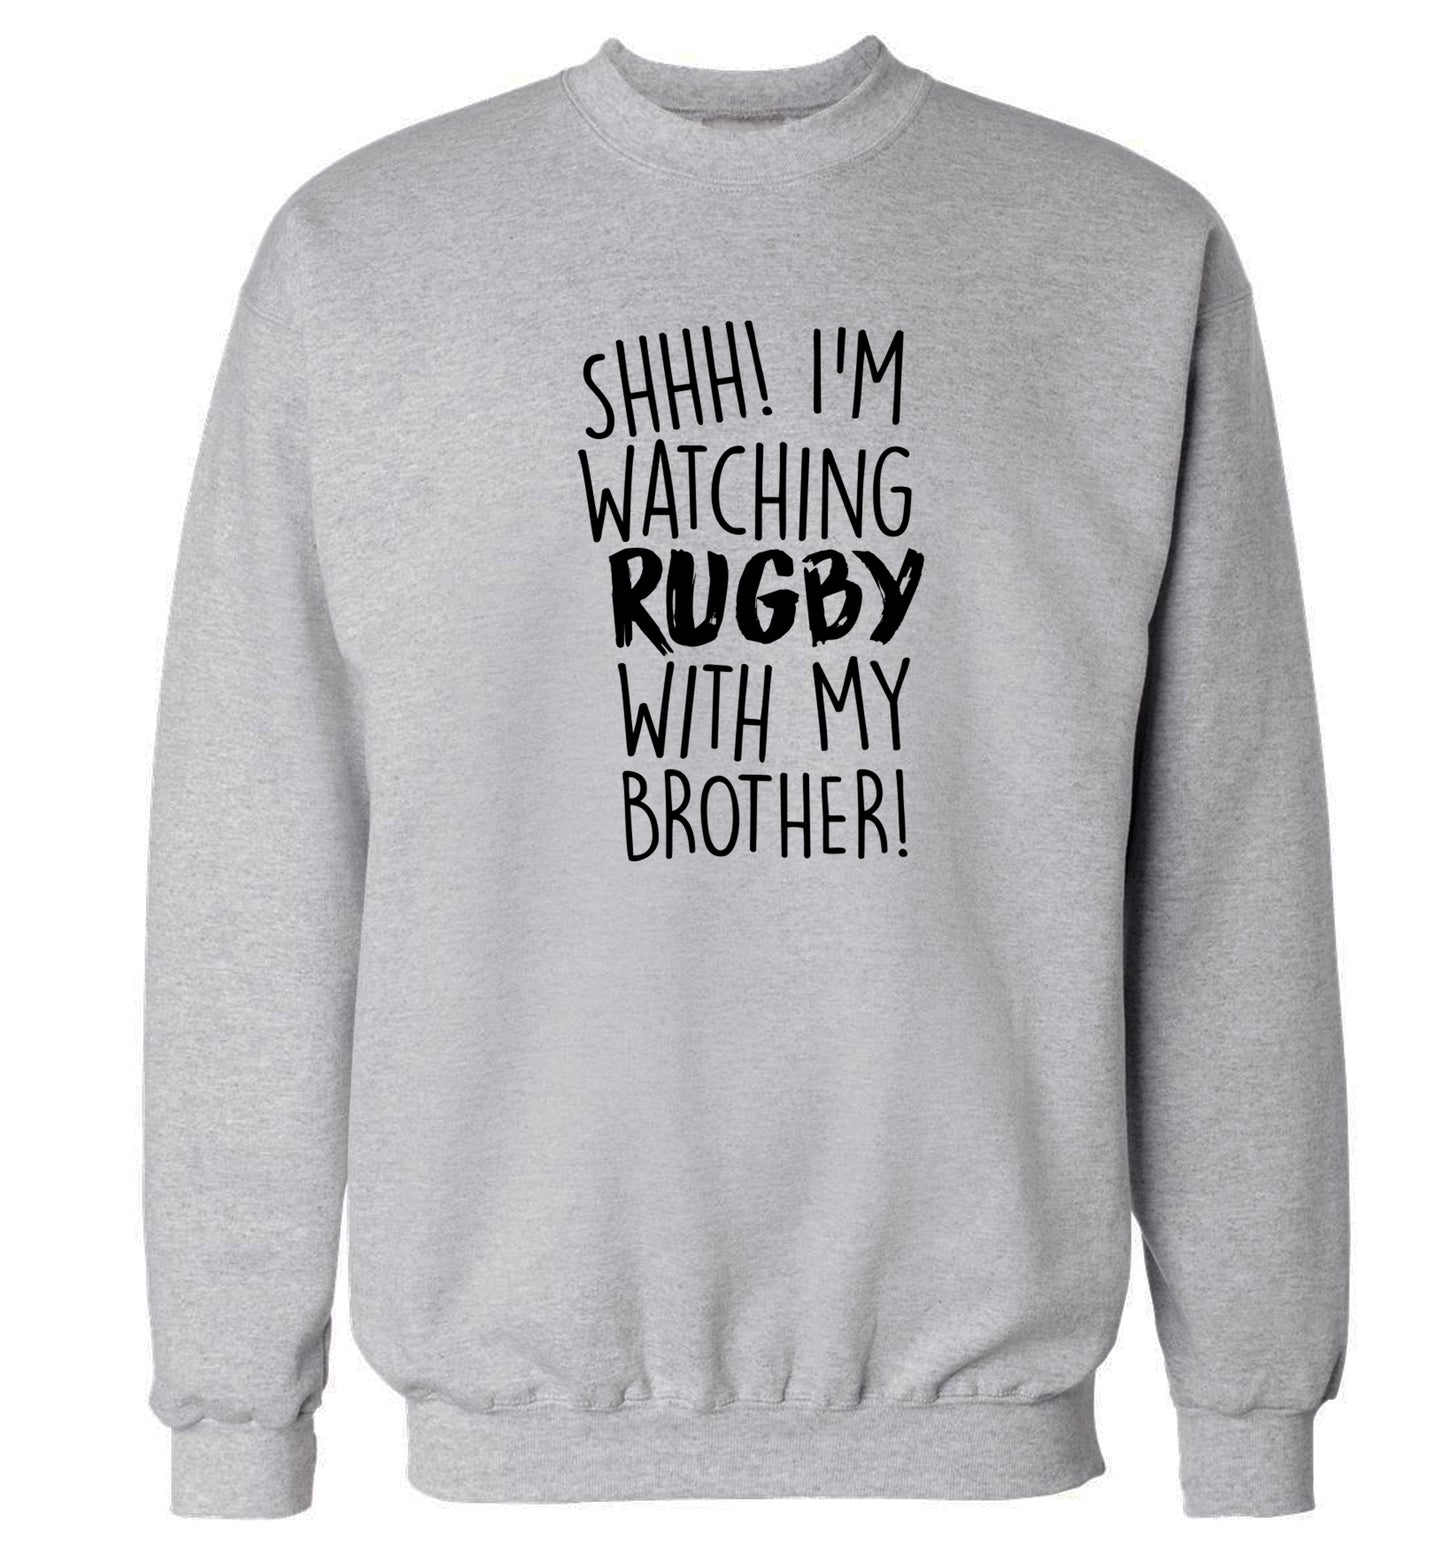 Shh... I'm watching rugby with my brother Adult's unisex grey Sweater 2XL